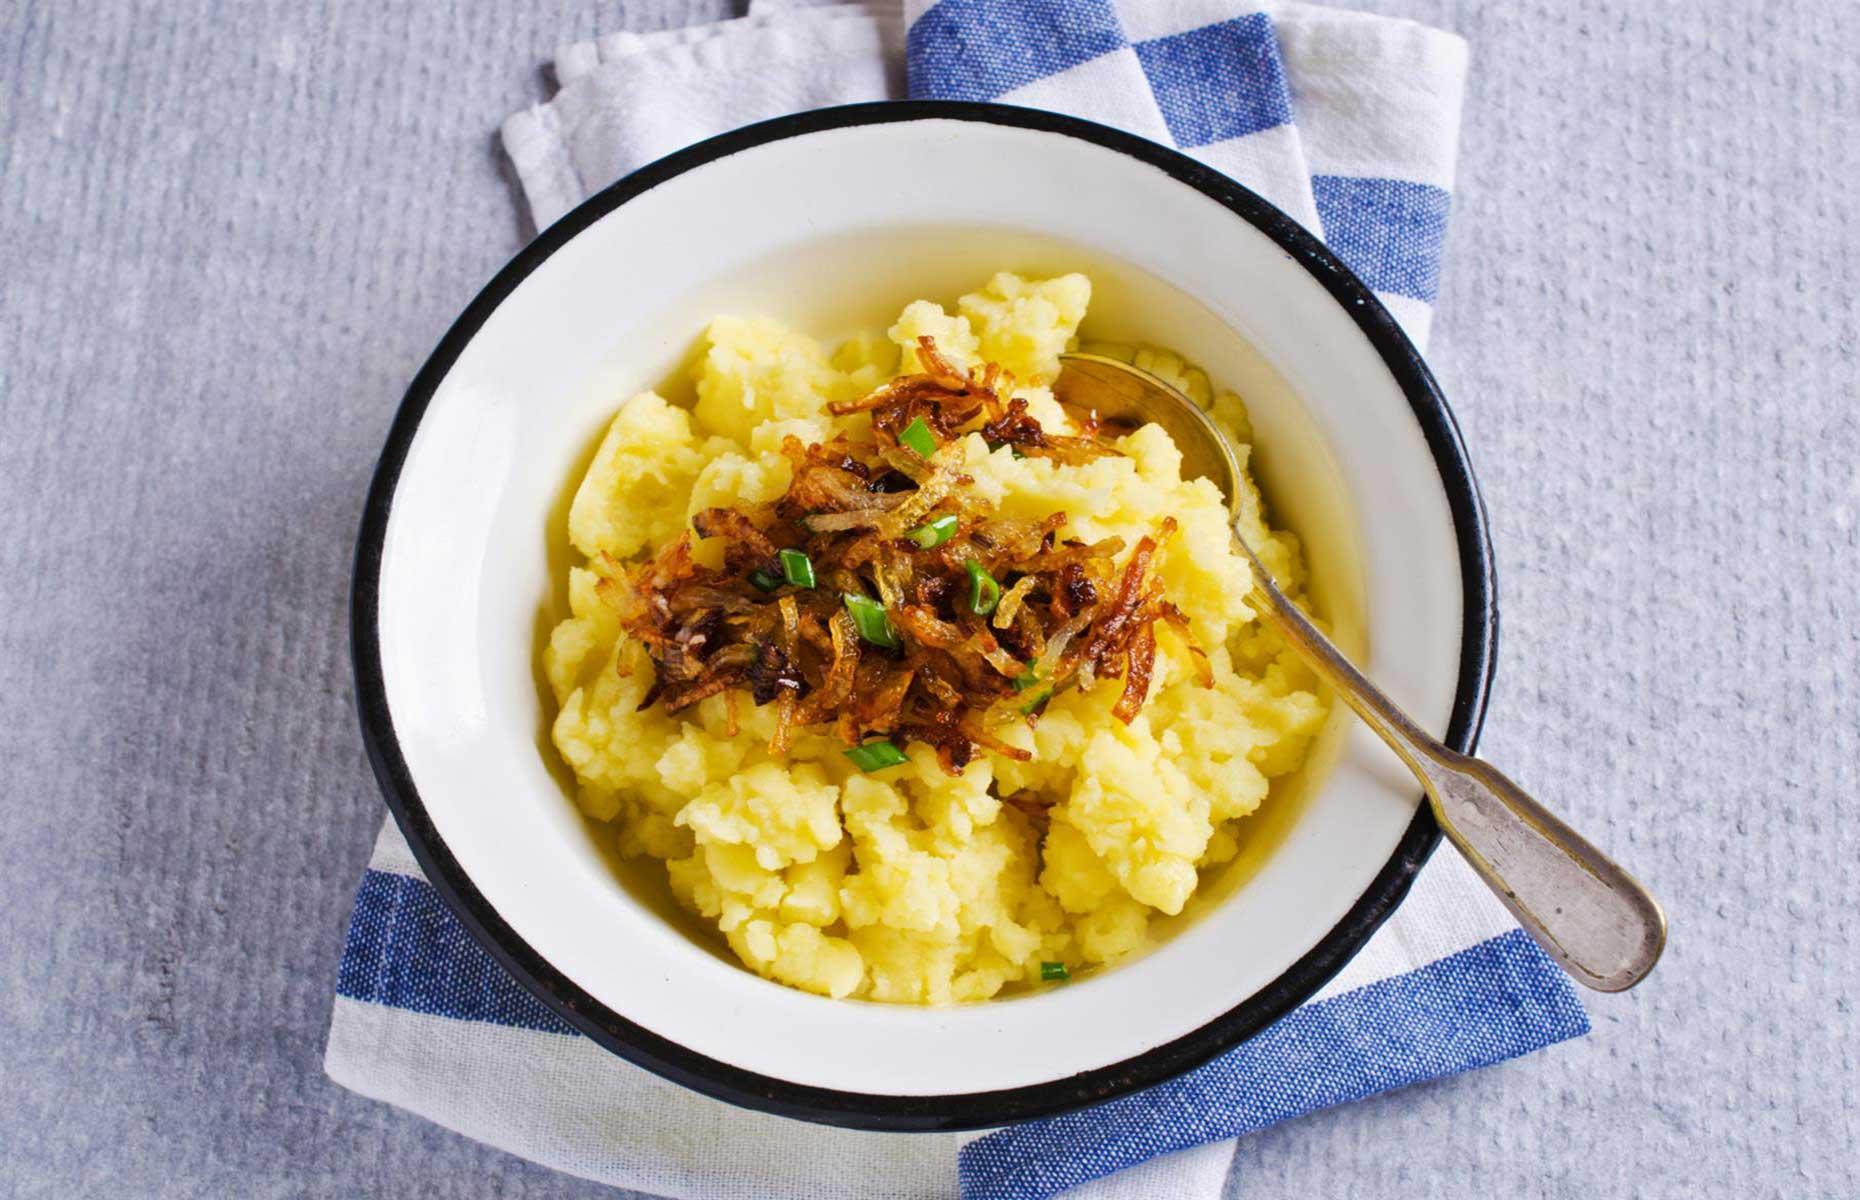 Level up your mashed potato with these INCREDIBLE recipe ideas